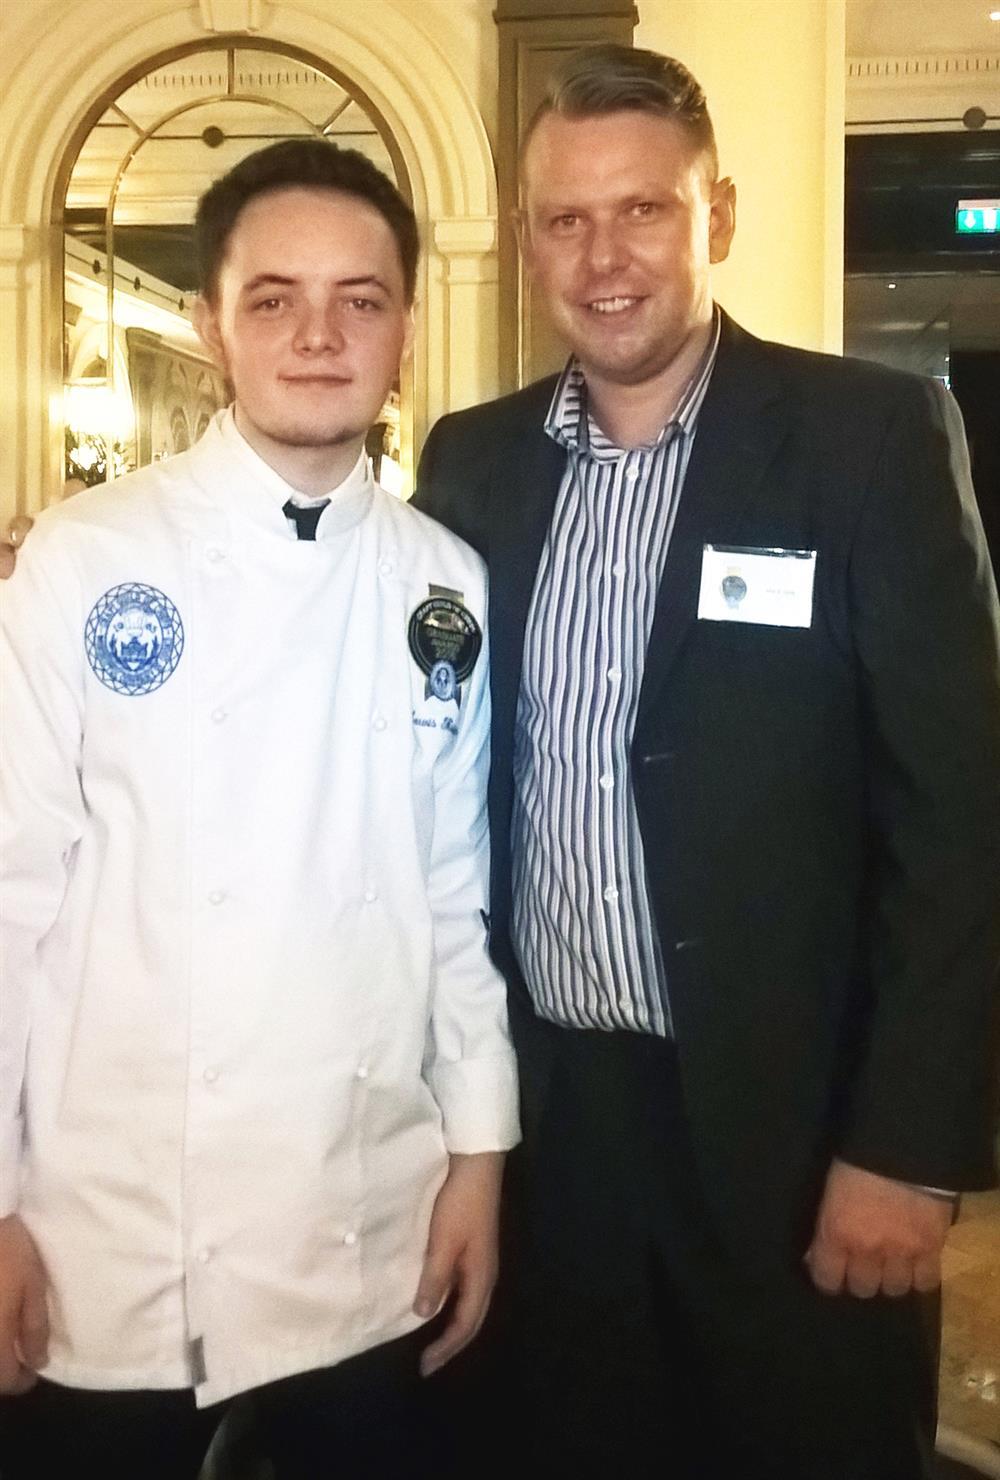 Lewis Kuciers with his mentor Mark Jones at The Park Lane Hotel in London